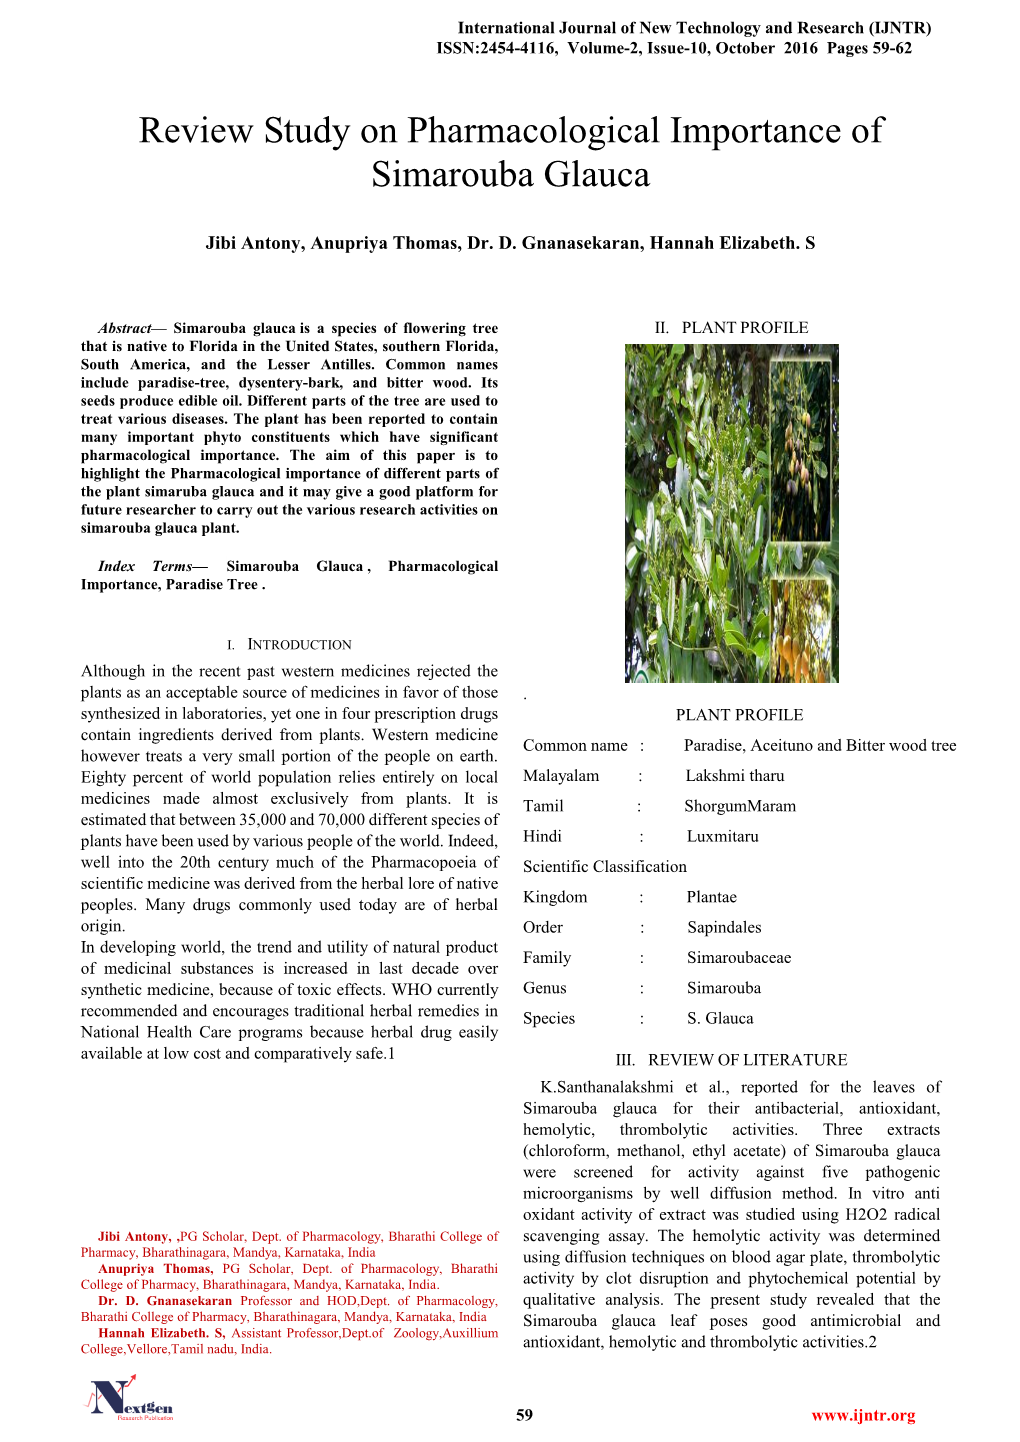 Review Study on Pharmacological Importance of Simarouba Glauca